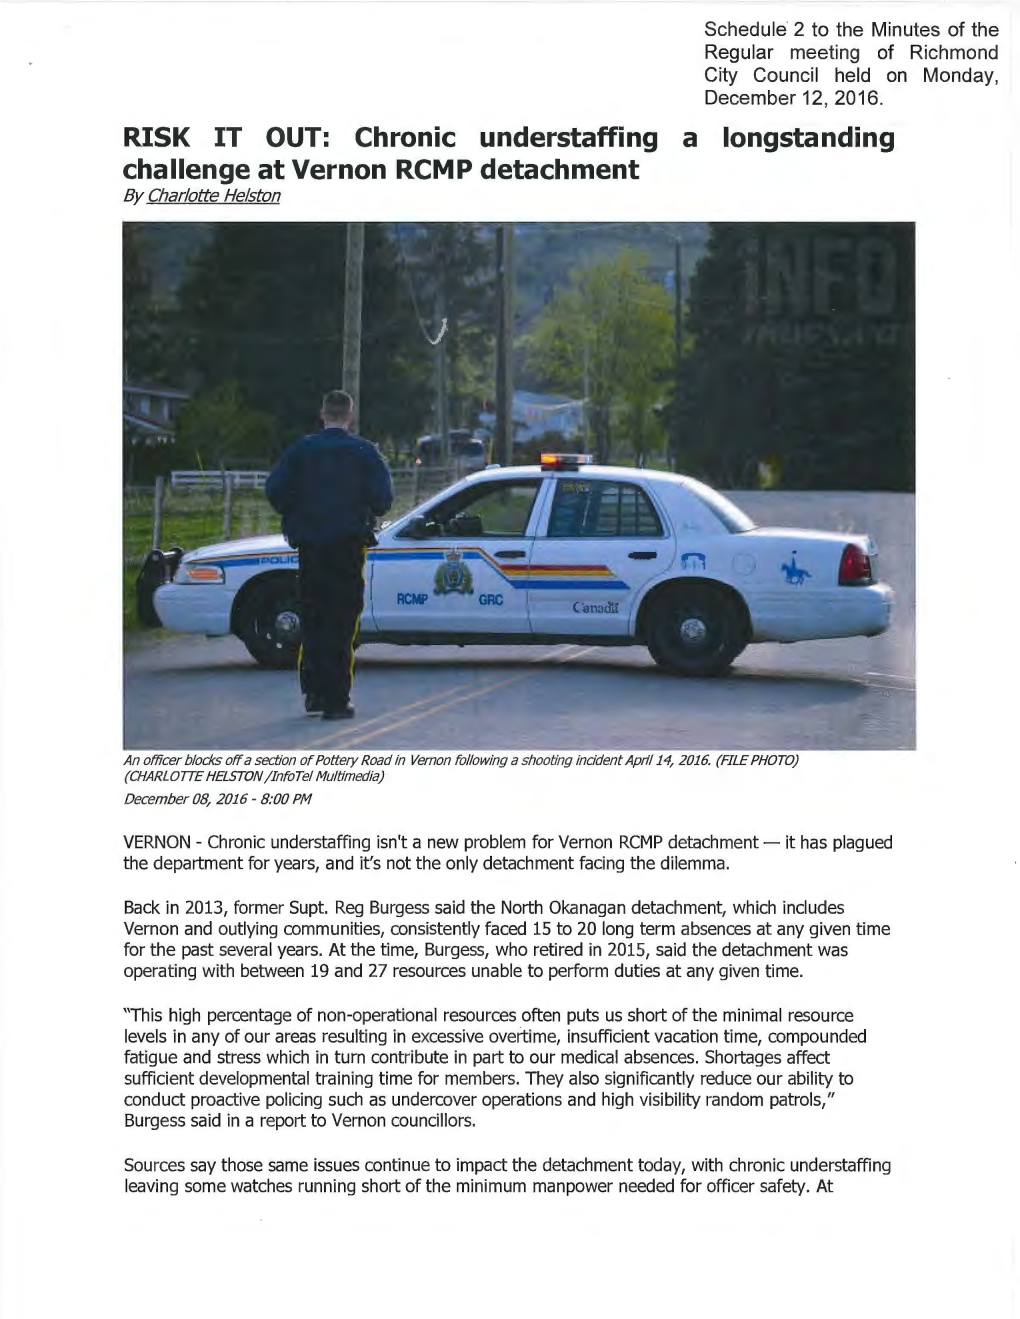 RISK IT OUT: Chronic Understaffing a Longstanding Challenge at Vernon RCMP Detachment by Charlotte He/Stan